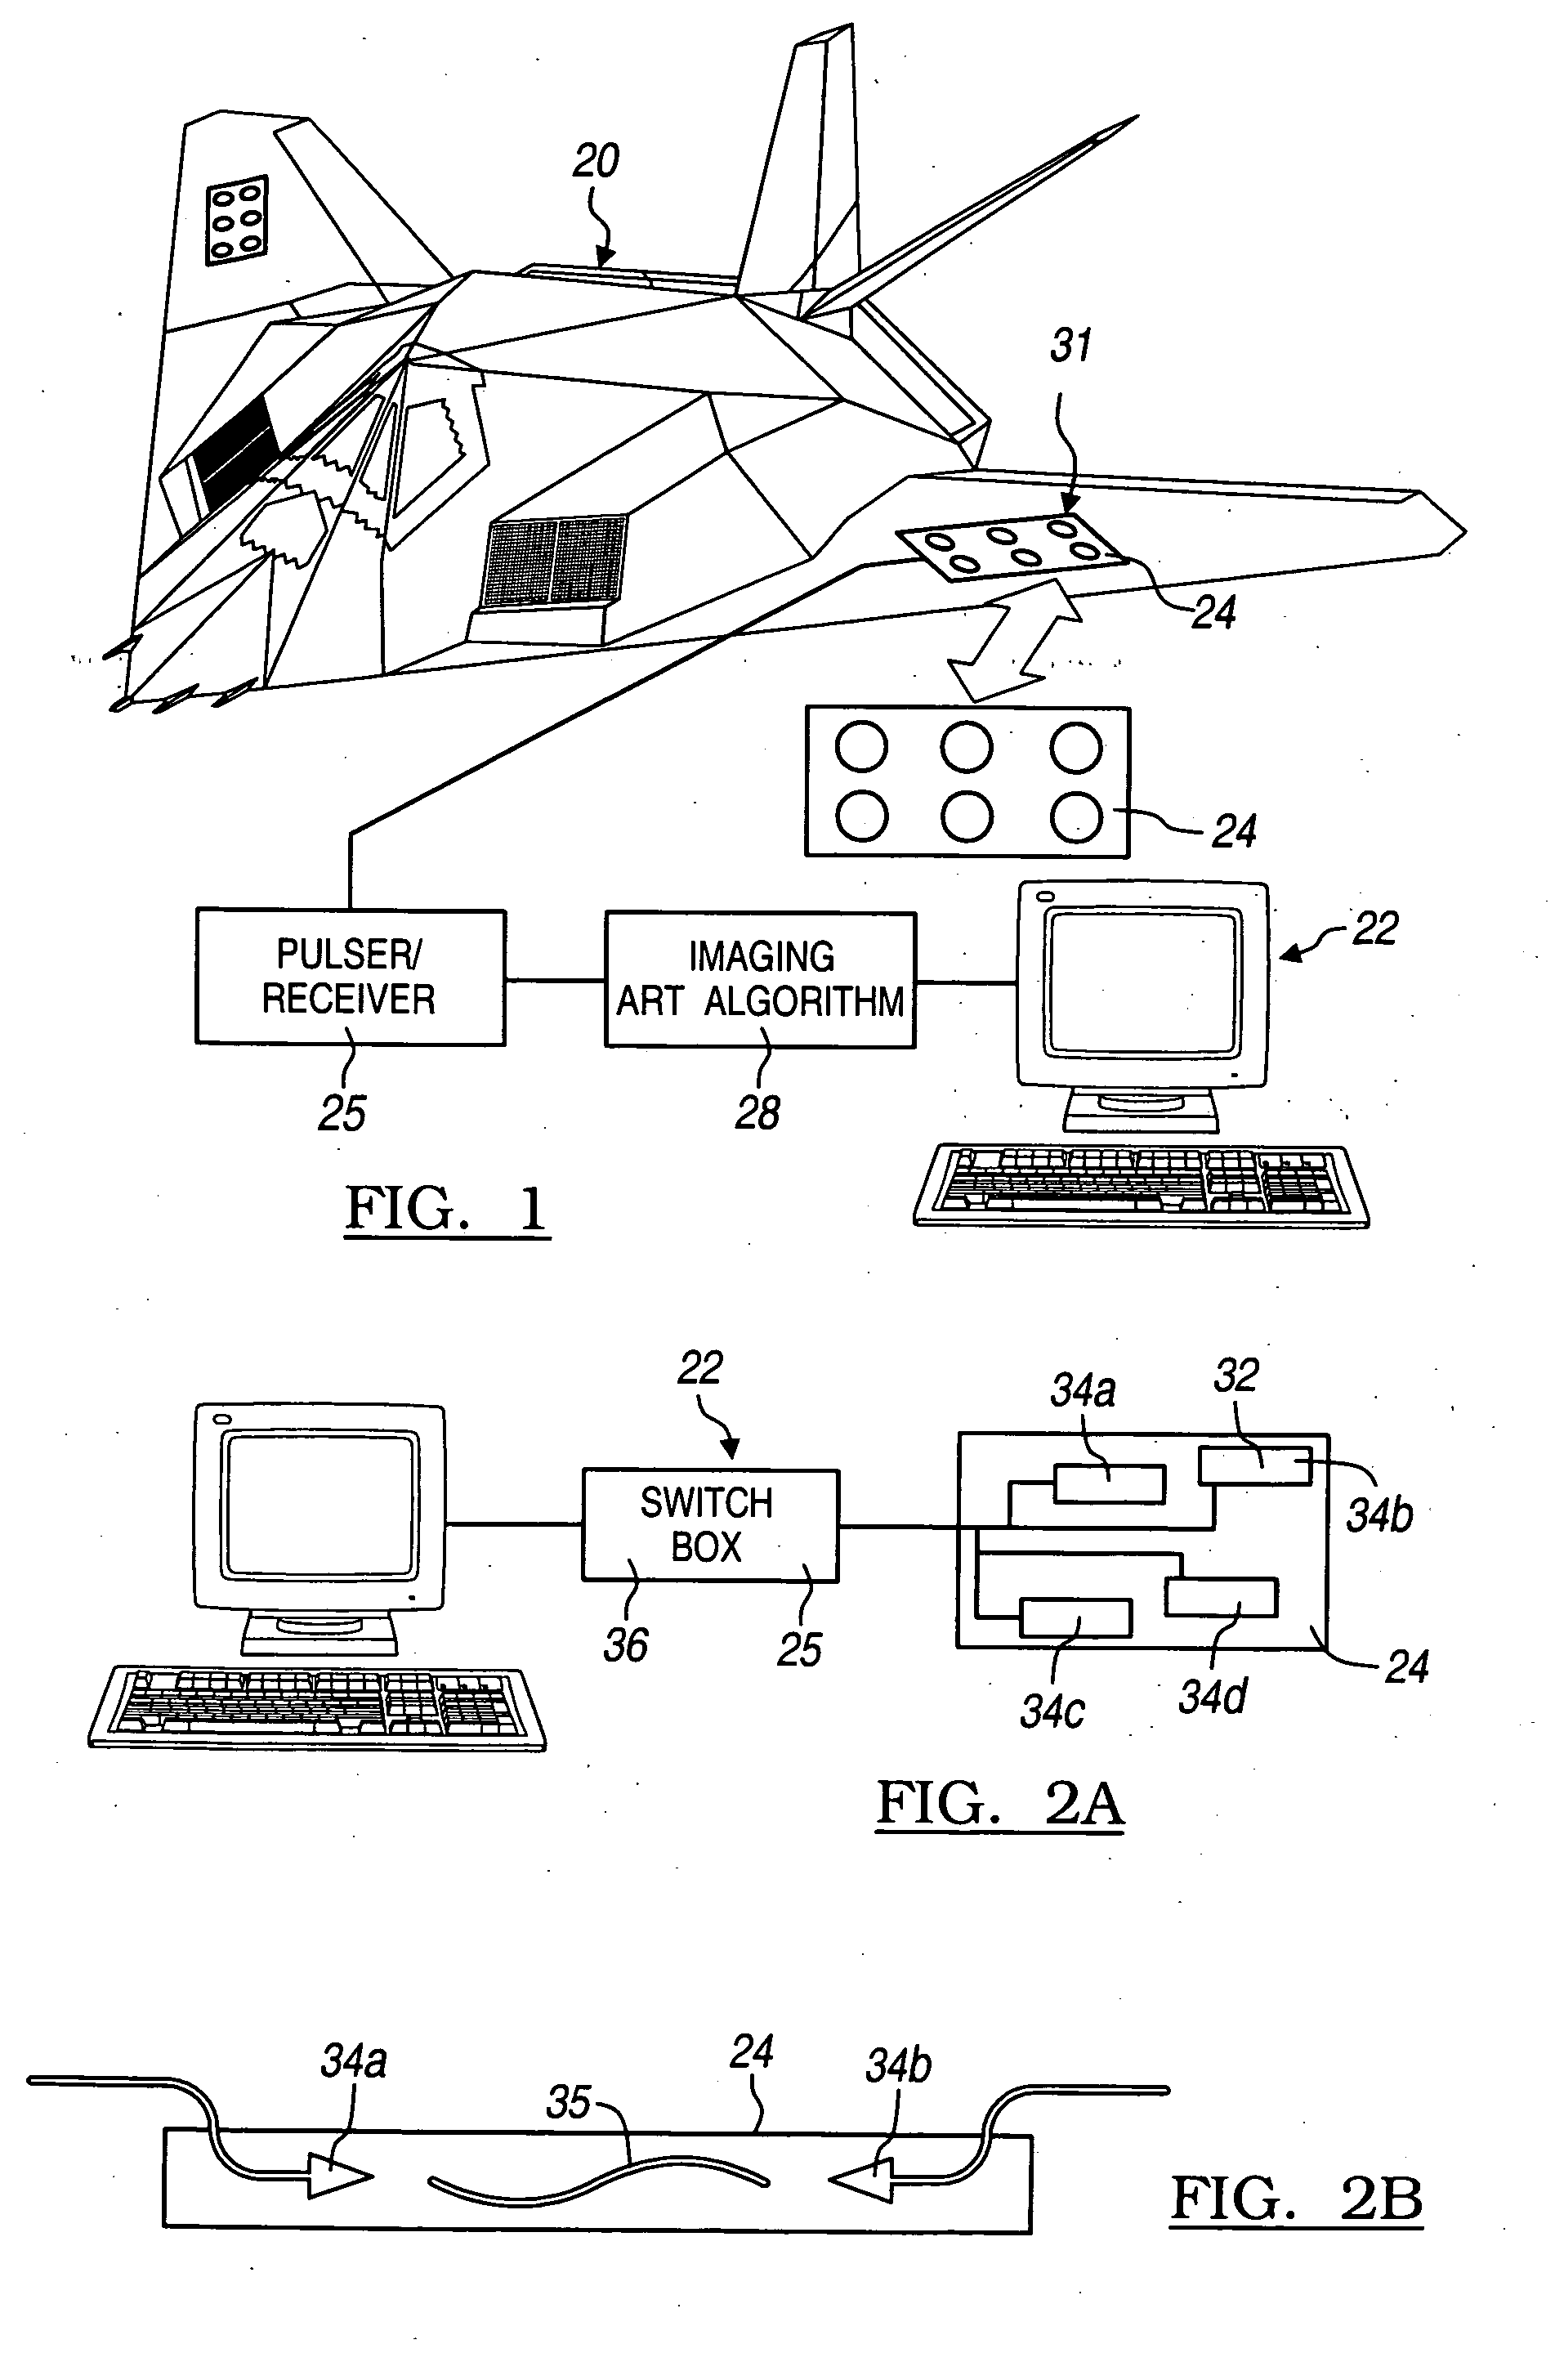 Manufacturing process or in service defects acoustic imaging using sensor array